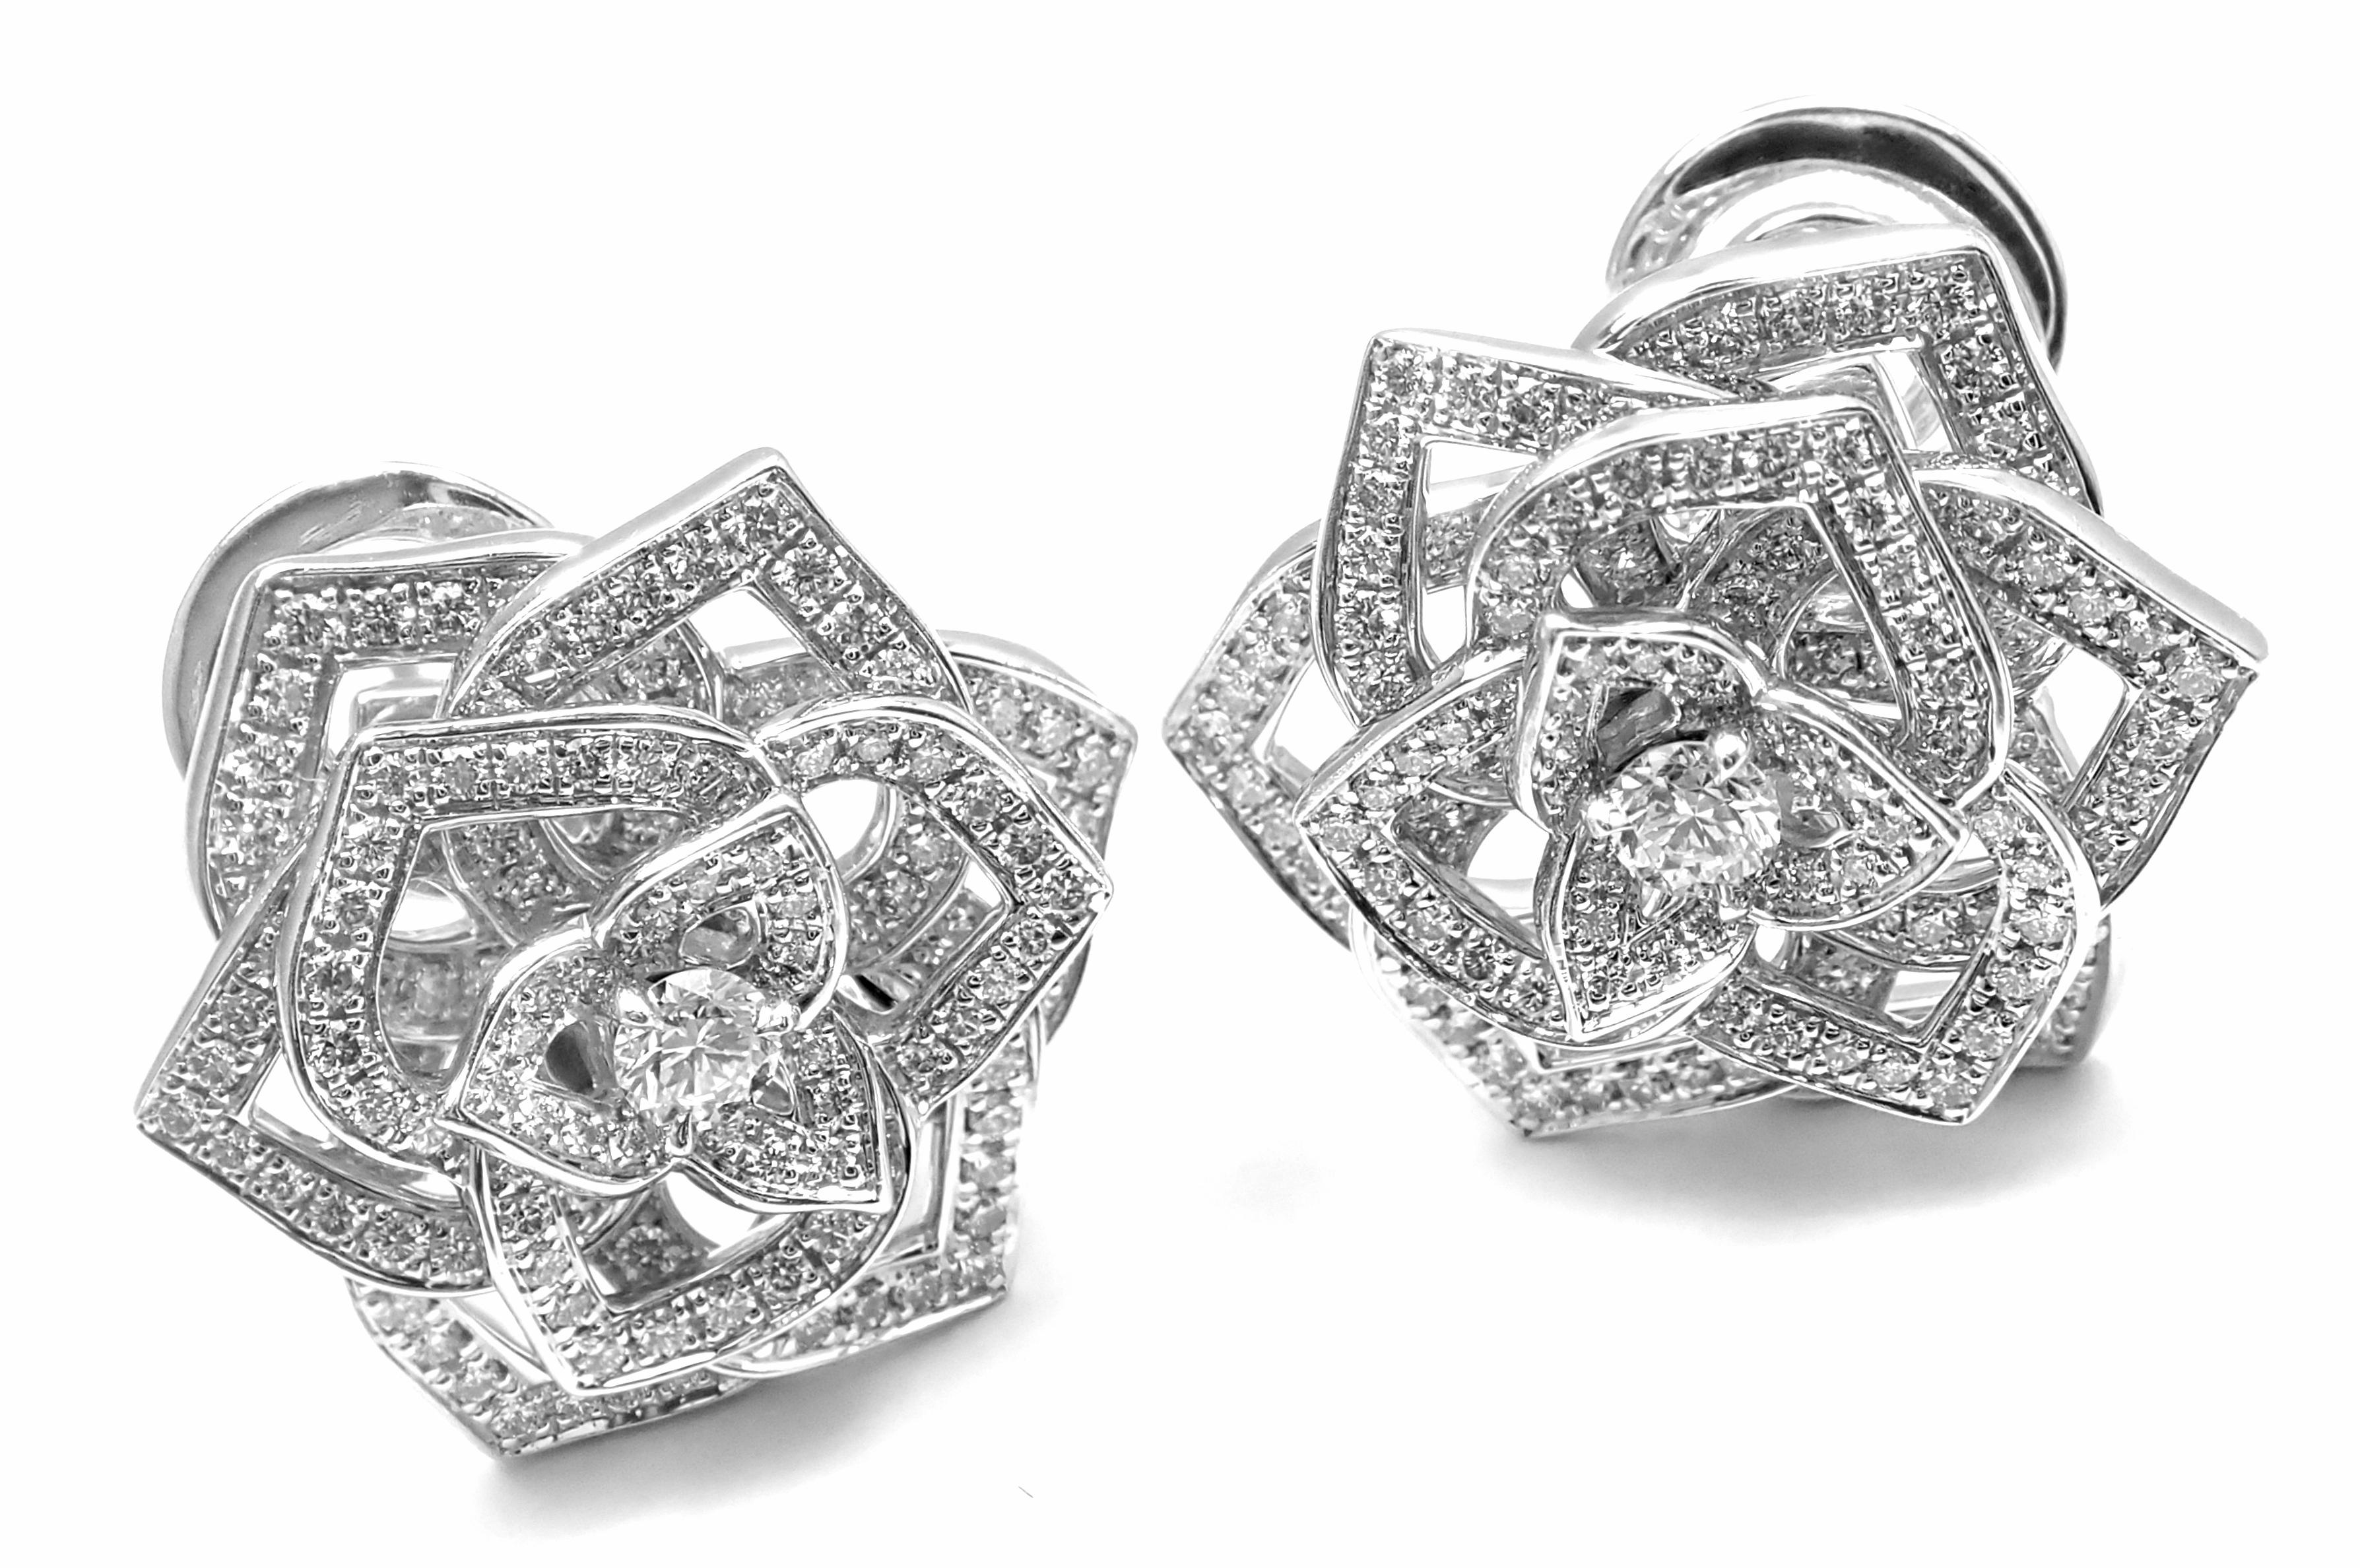 18k White Gold Diamond Rose Flower Earrings by Piaget. 
With 304 brilliant cut diamonds VVS1, G color, approx. 1.30ct
These earrings have collapsable posts, so that you can wear it on pierced ears or not pierced ears.
Details: 
Weight: 12.2